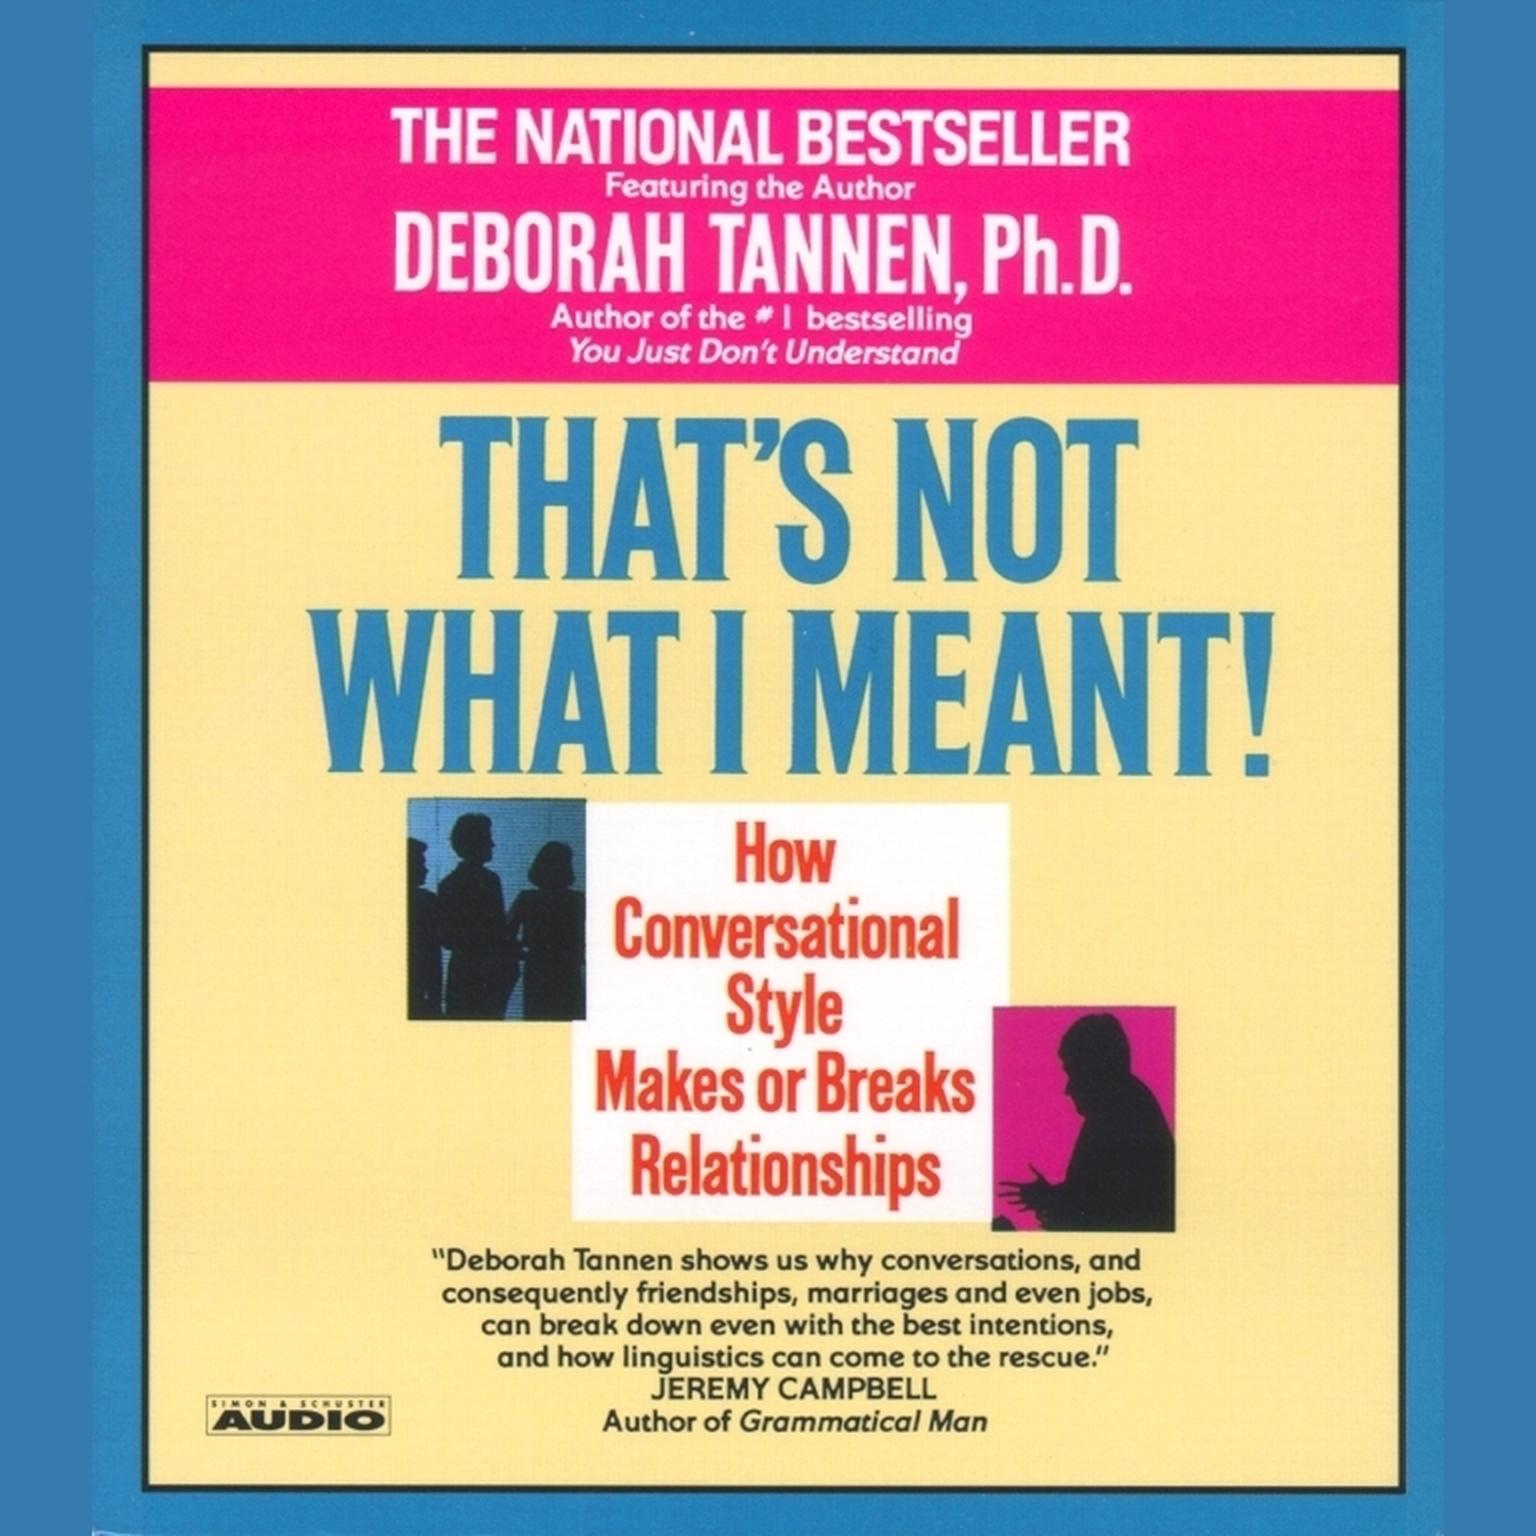 Thats Not What I Meant! (Abridged): How Conversational Style Makes or Breaks Relationships Audiobook, by Deborah Tannen